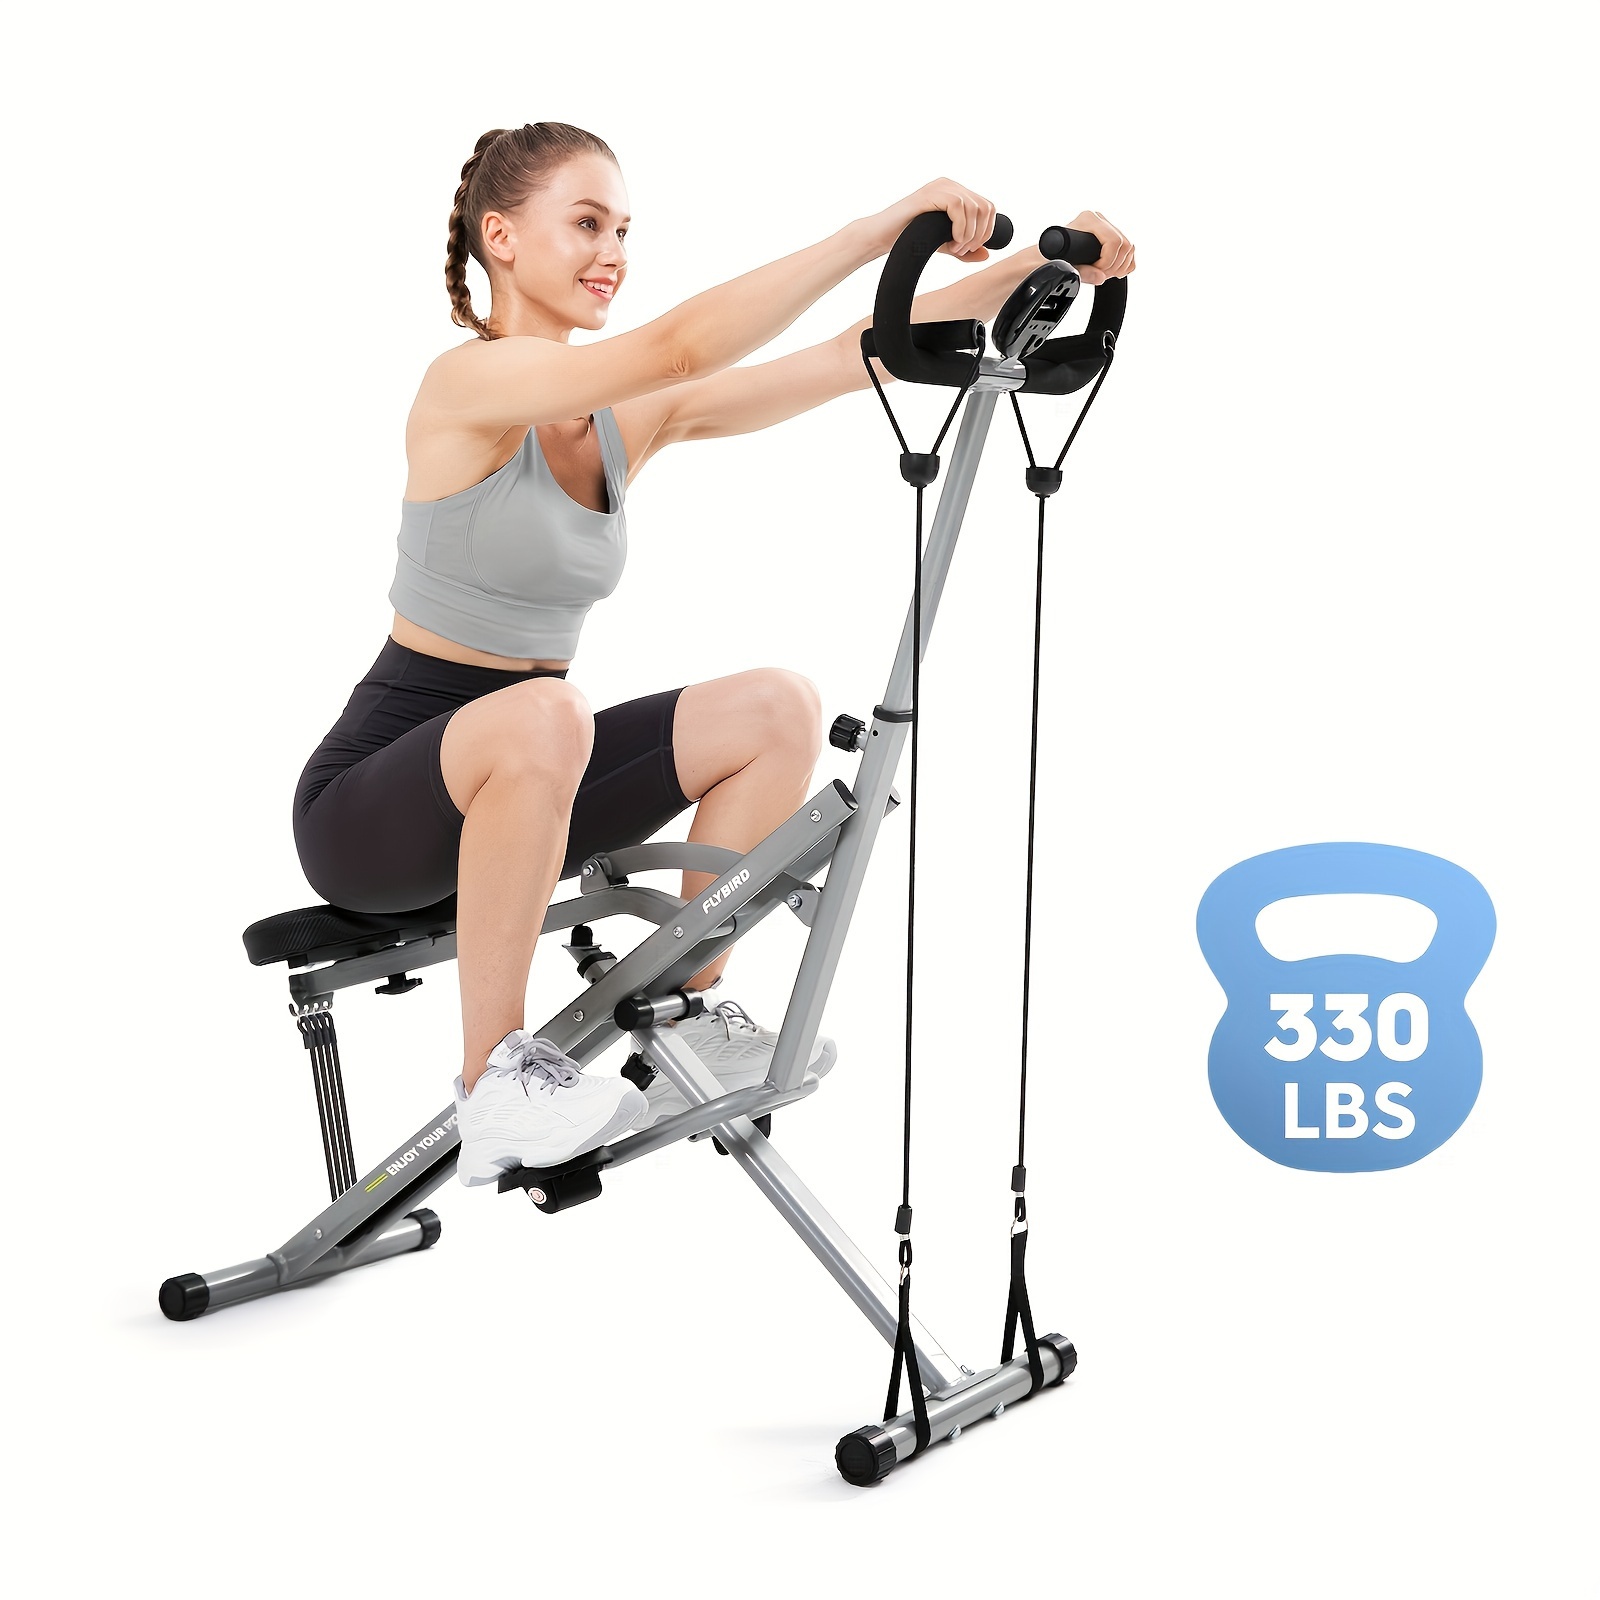 

Flybird Duo Motion Row And Squat Assist Multi-functional Workout Trainer With Adjustable Resistance, Easy Setup & Foldable, Glute & Leg Exercise Machine -